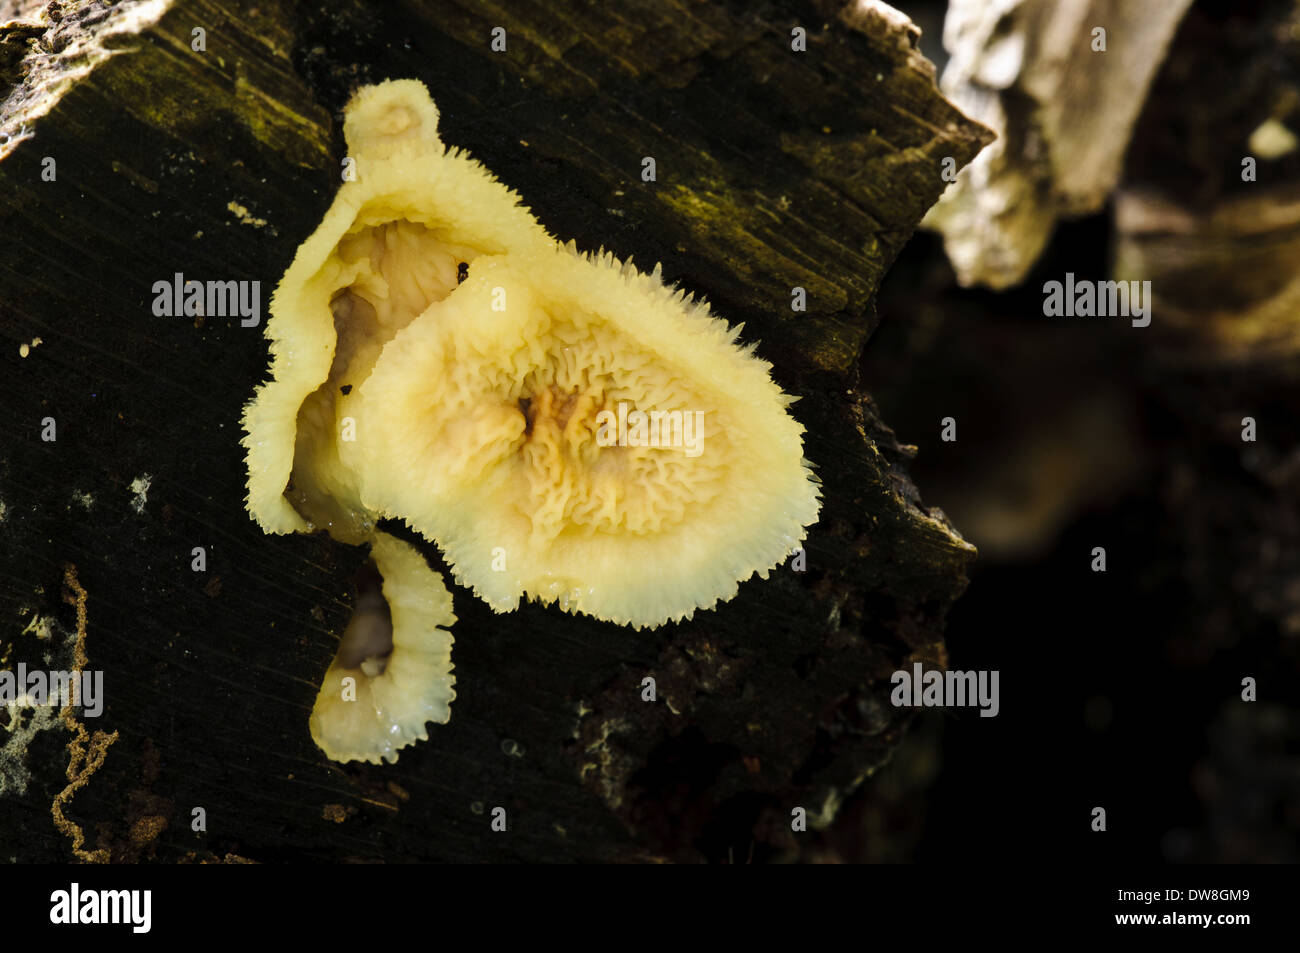 Jelly Rot Fungus (Phlebia tremellosa) fruiting body growing on decaying wood Clumber Park Nottinghamshire England September Stock Photo